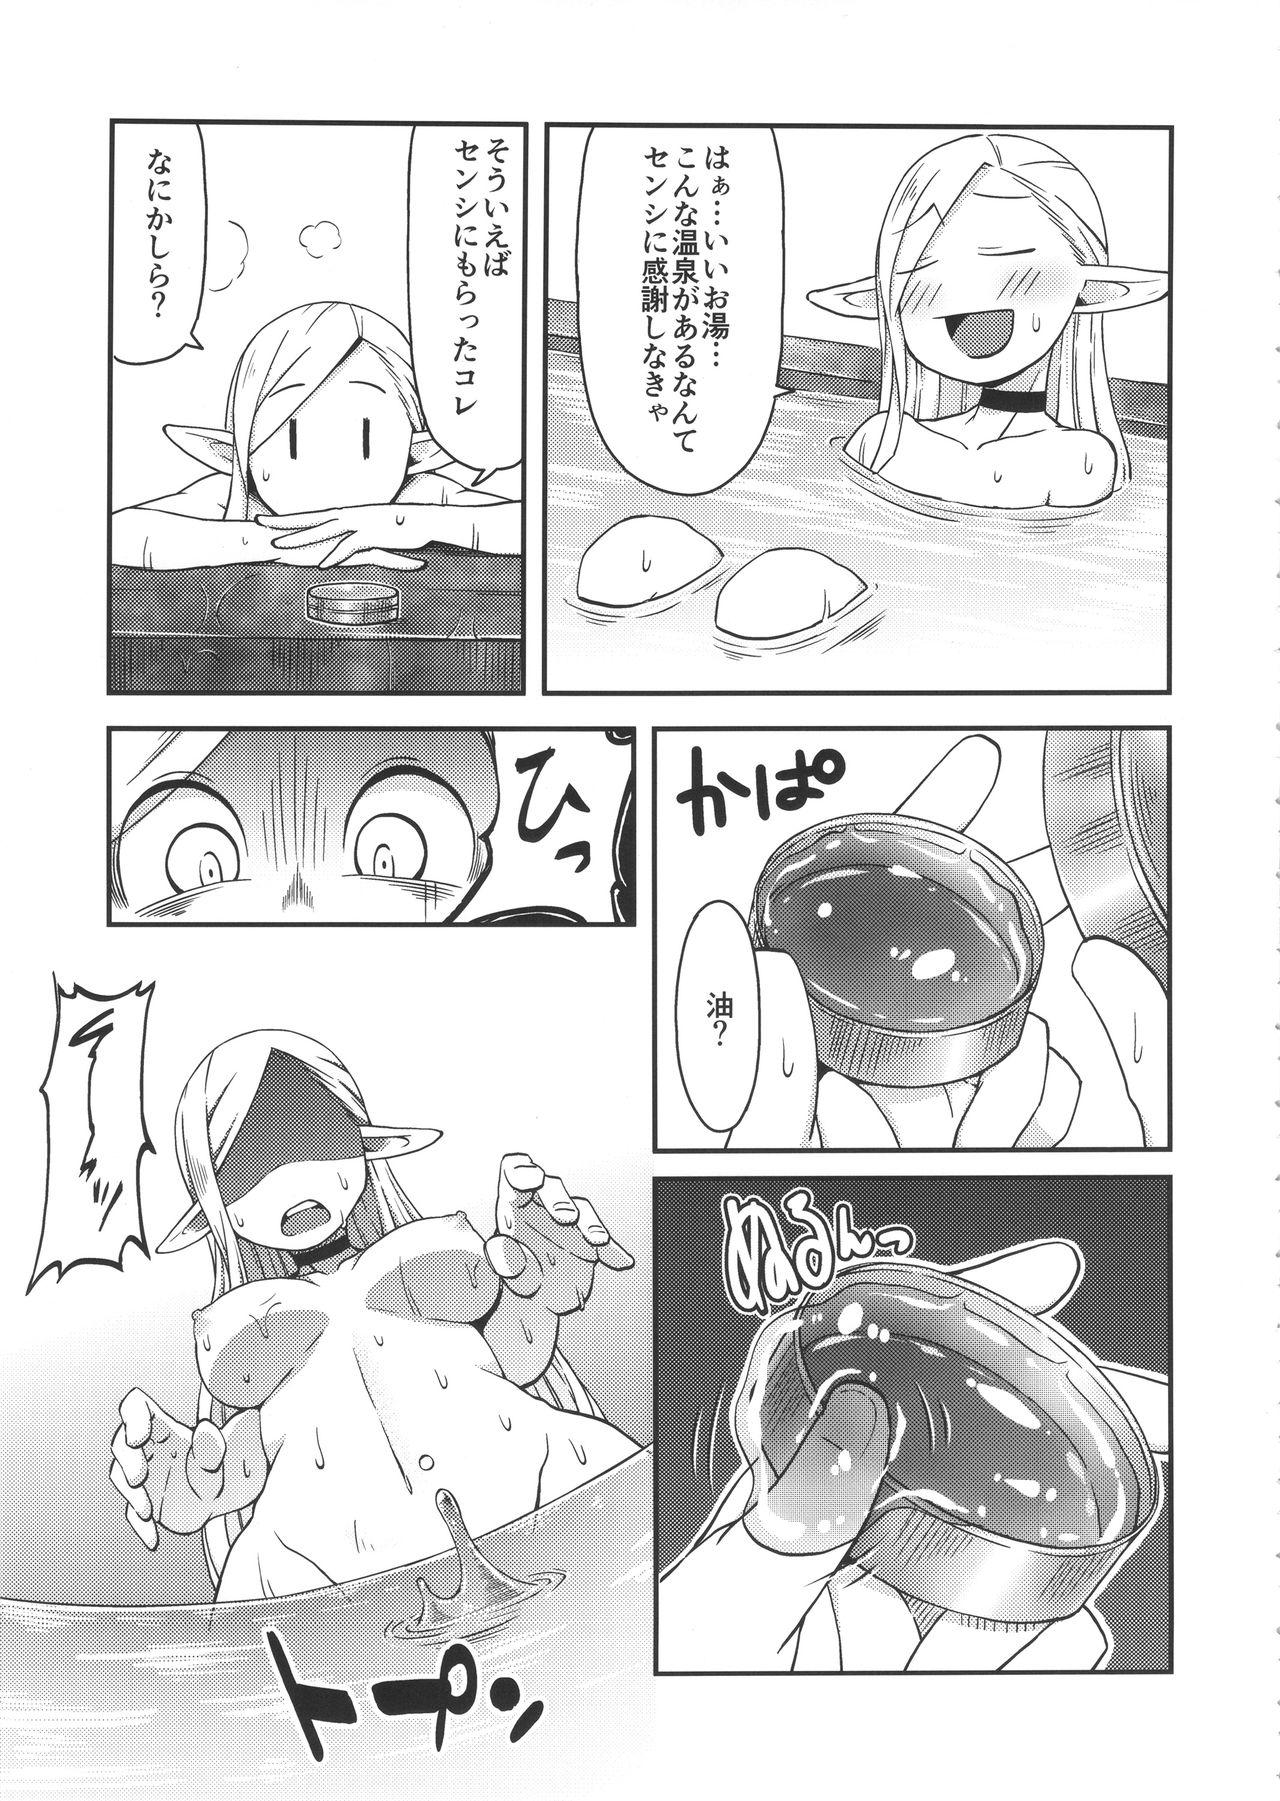 Best Blowjob Ever Dungeon Cooking - Dungeon meshi Forwomen - Page 8